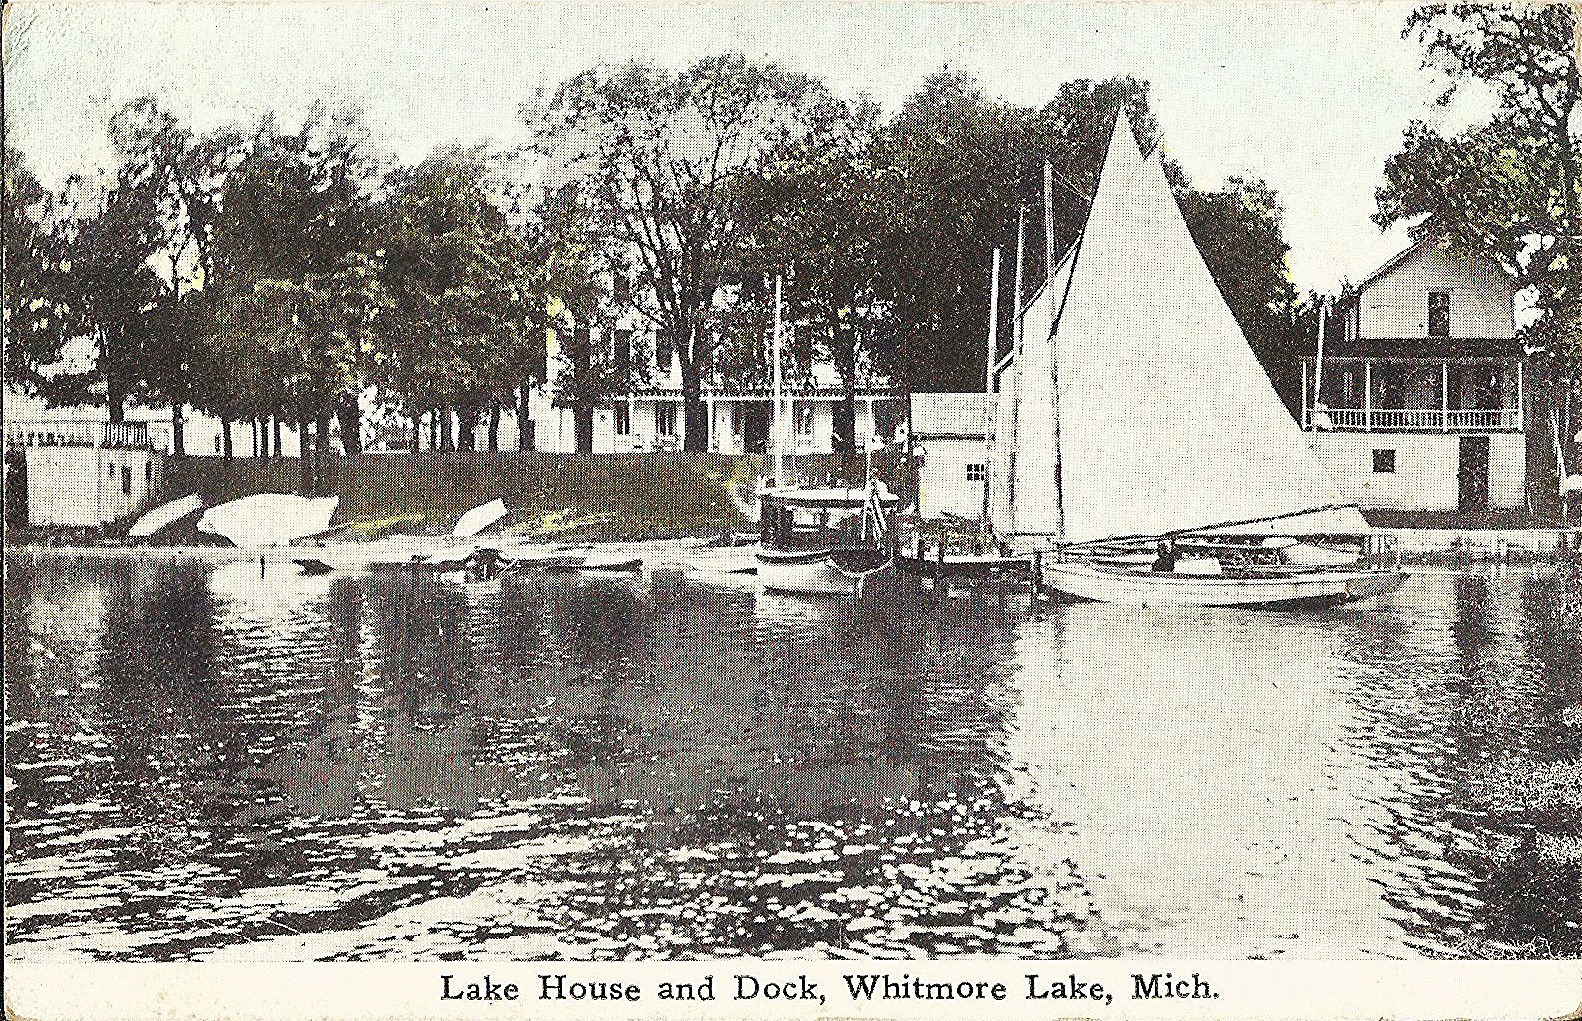 a small sail boat is shown near water